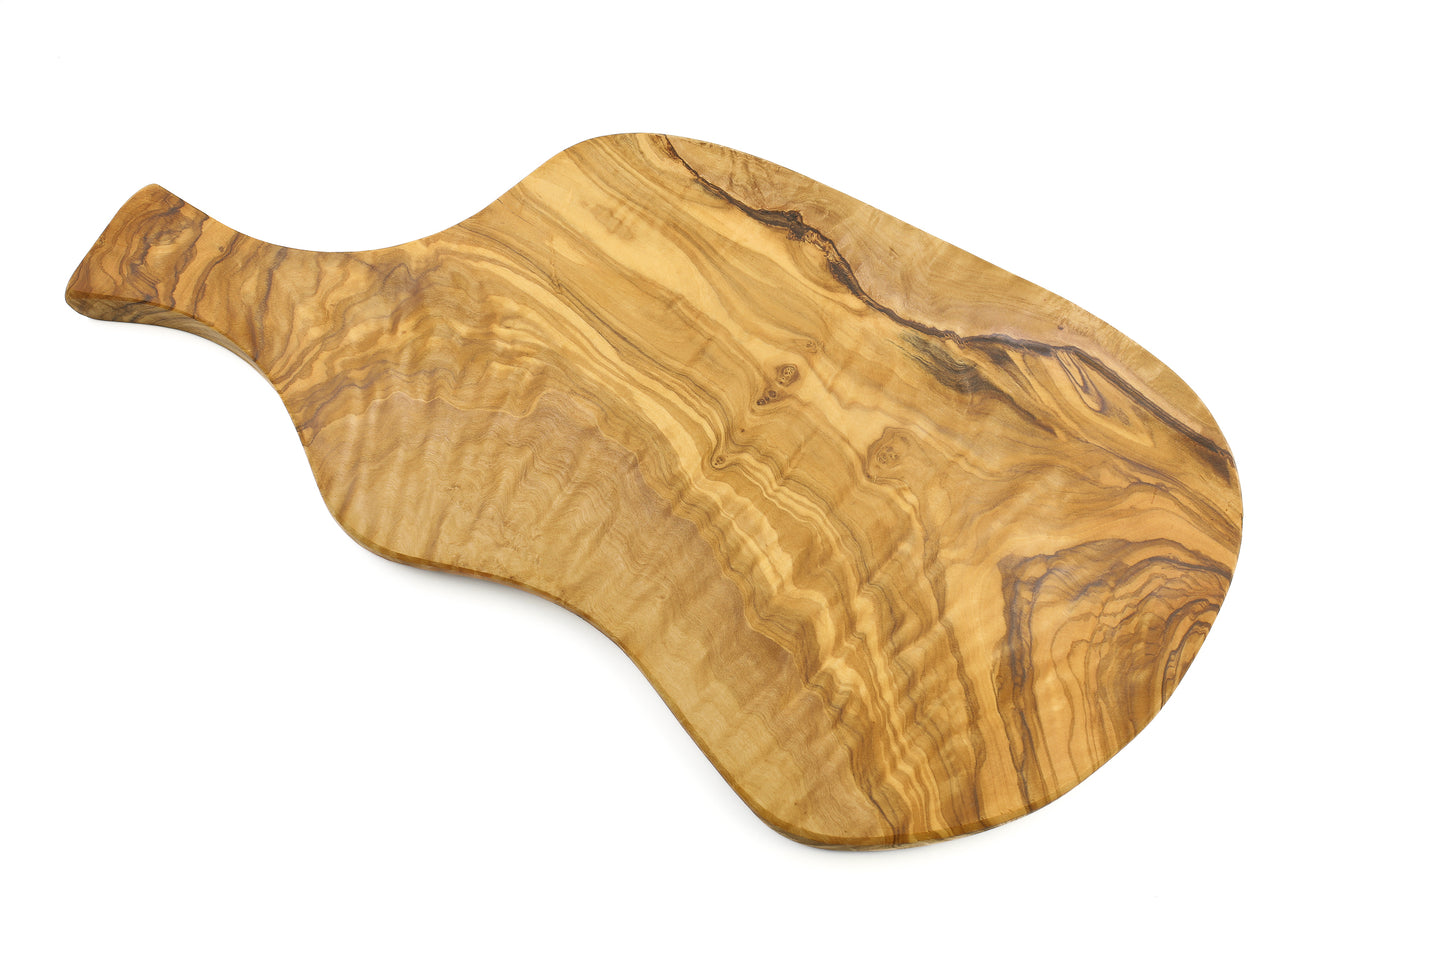 Hand-finished olive wood kitchen utensil with an irregular shape inspired by a beef thigh and a practical handle